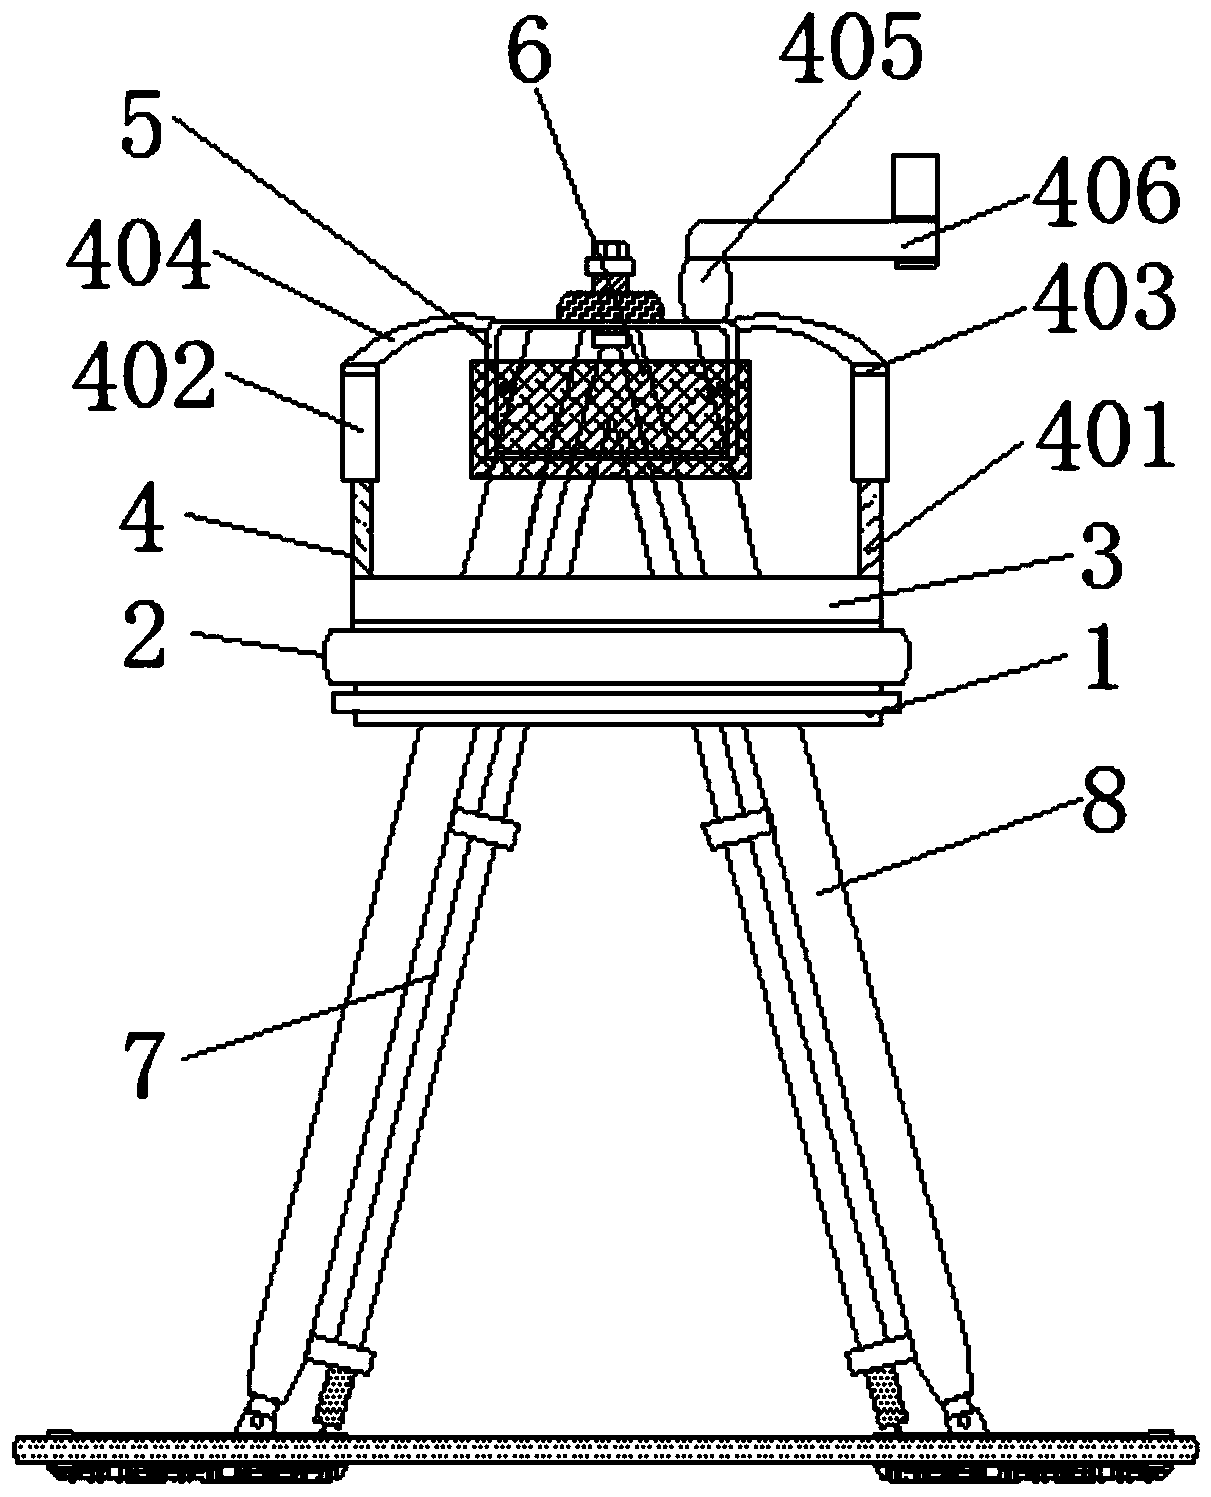 A three-necked flask scrubbing device with directional control of cleaning range